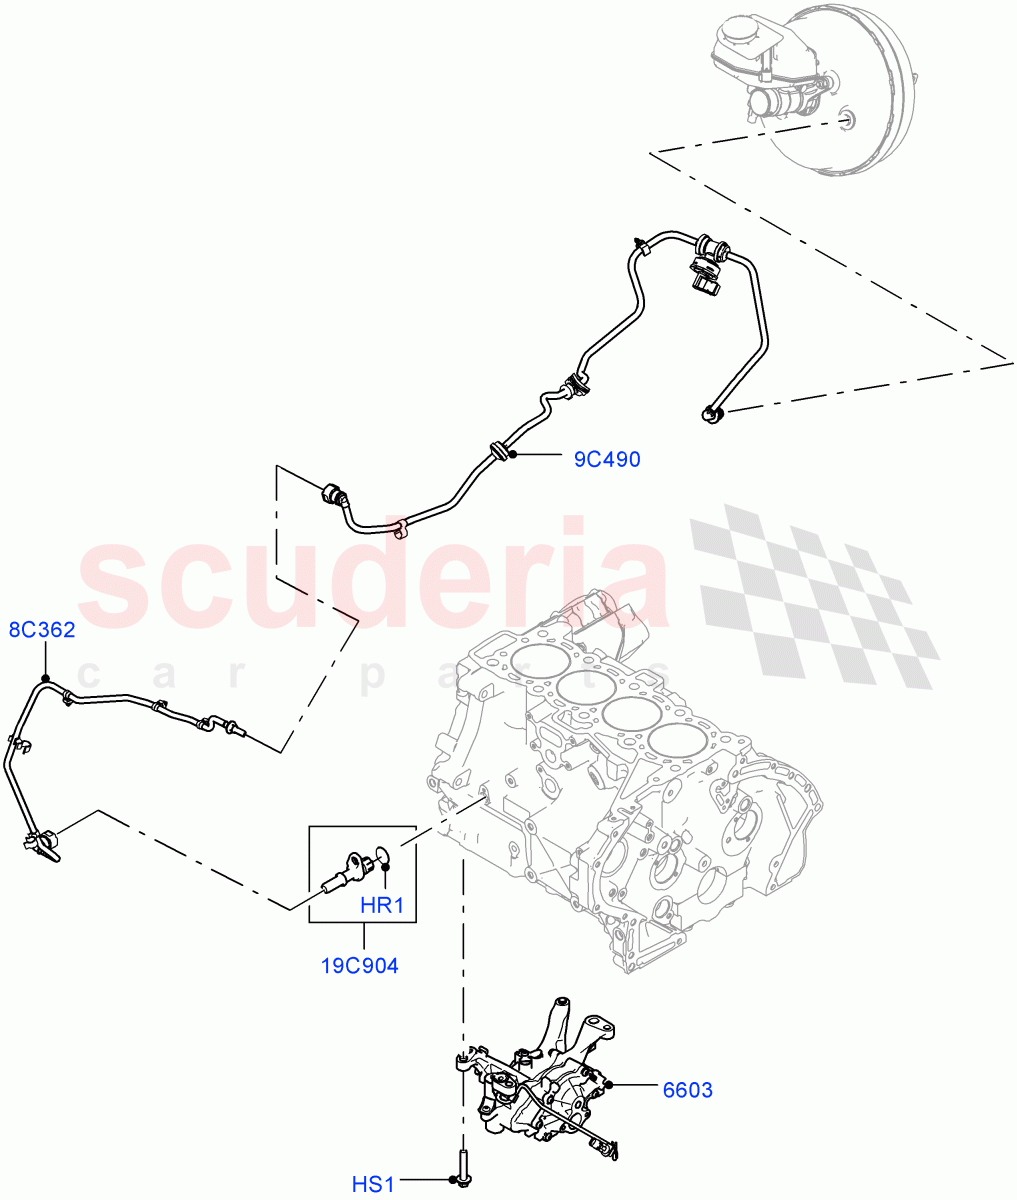 Vacuum Control And Air Injection(2.0L I4 DSL MID DOHC AJ200,Itatiaia (Brazil),Starter - Stop/Start System)((V)FROMGT000001) of Land Rover Land Rover Discovery Sport (2015+) [2.0 Turbo Diesel]